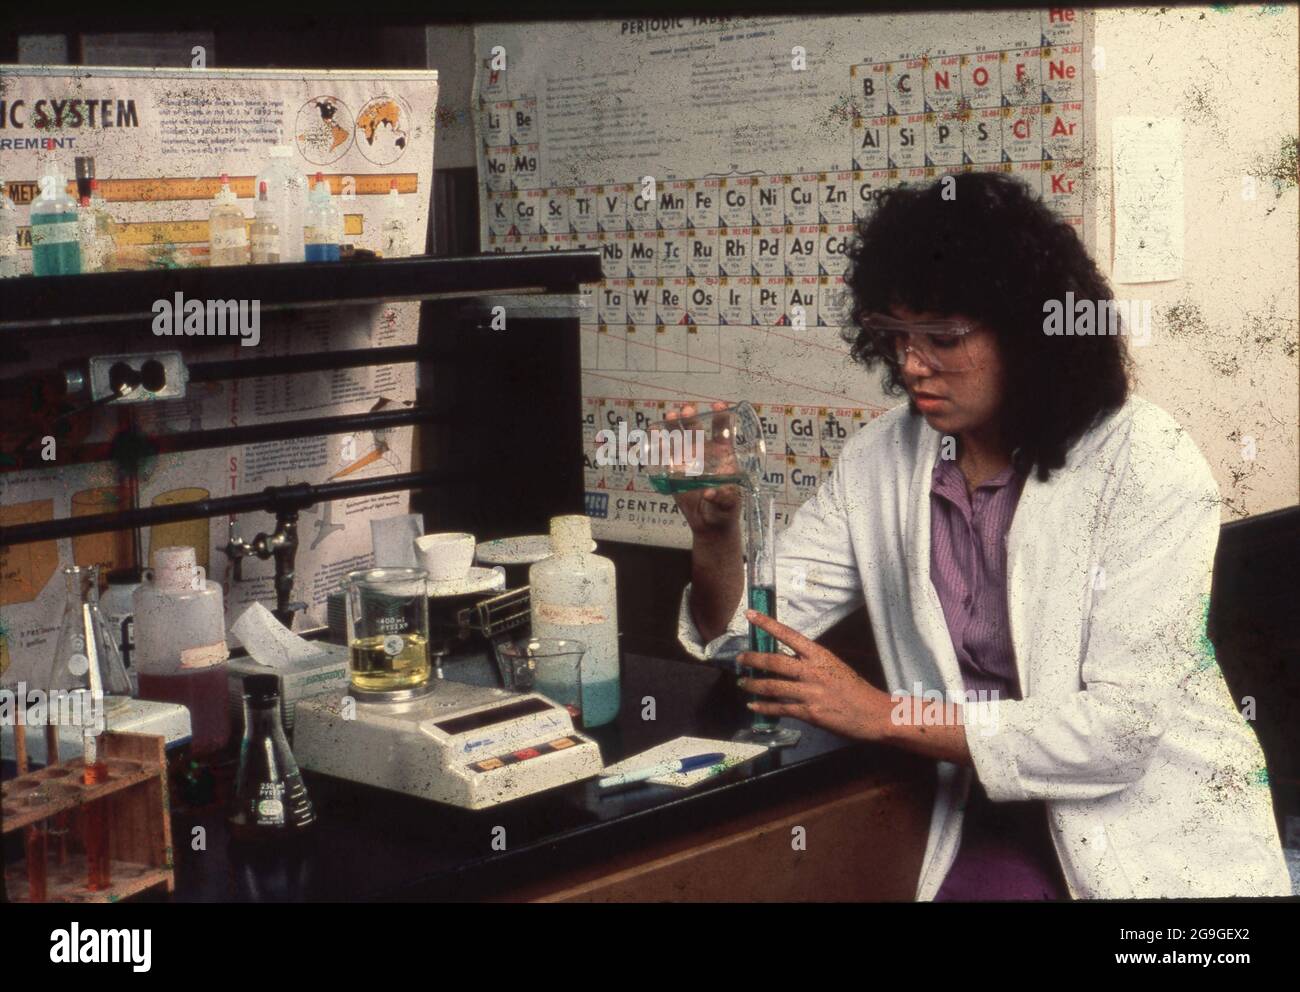 Austin, Texas USA, 1990: Hispanic college student measures a liquid as she pours it from a beaker into a graduated cylinder in a chemistry lab. ©Bob Daemmrich Stock Photo